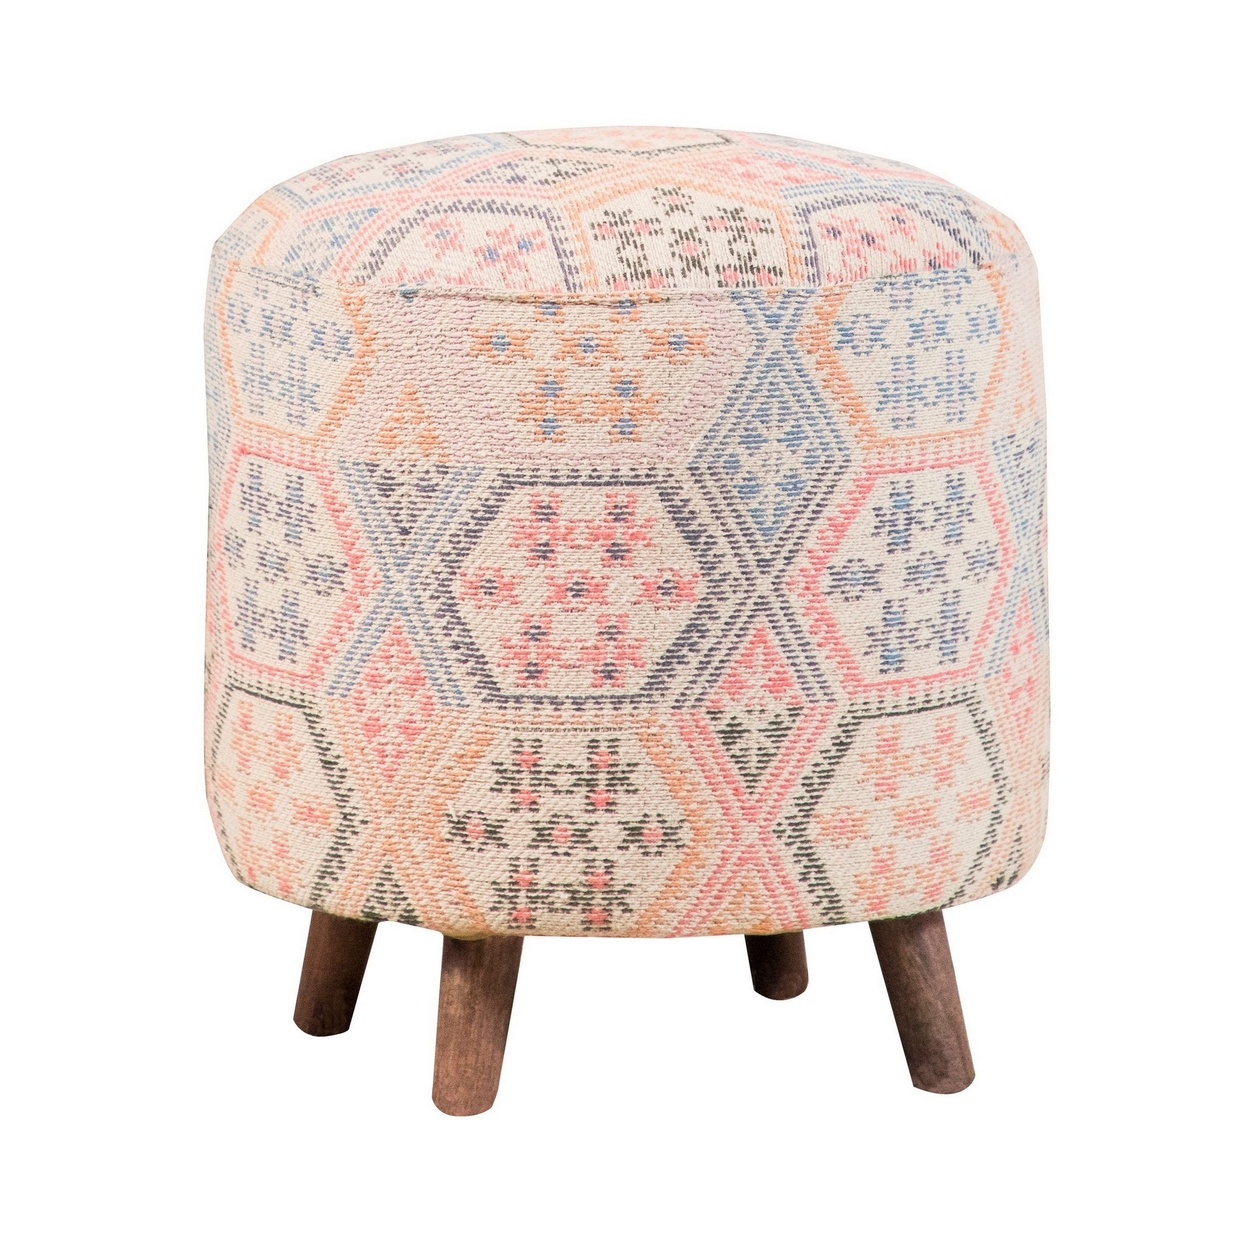 18 Inch Bohemian Style Wood Accent Stool With Multicolor Woven Upholstery- Saltoro Sherpi